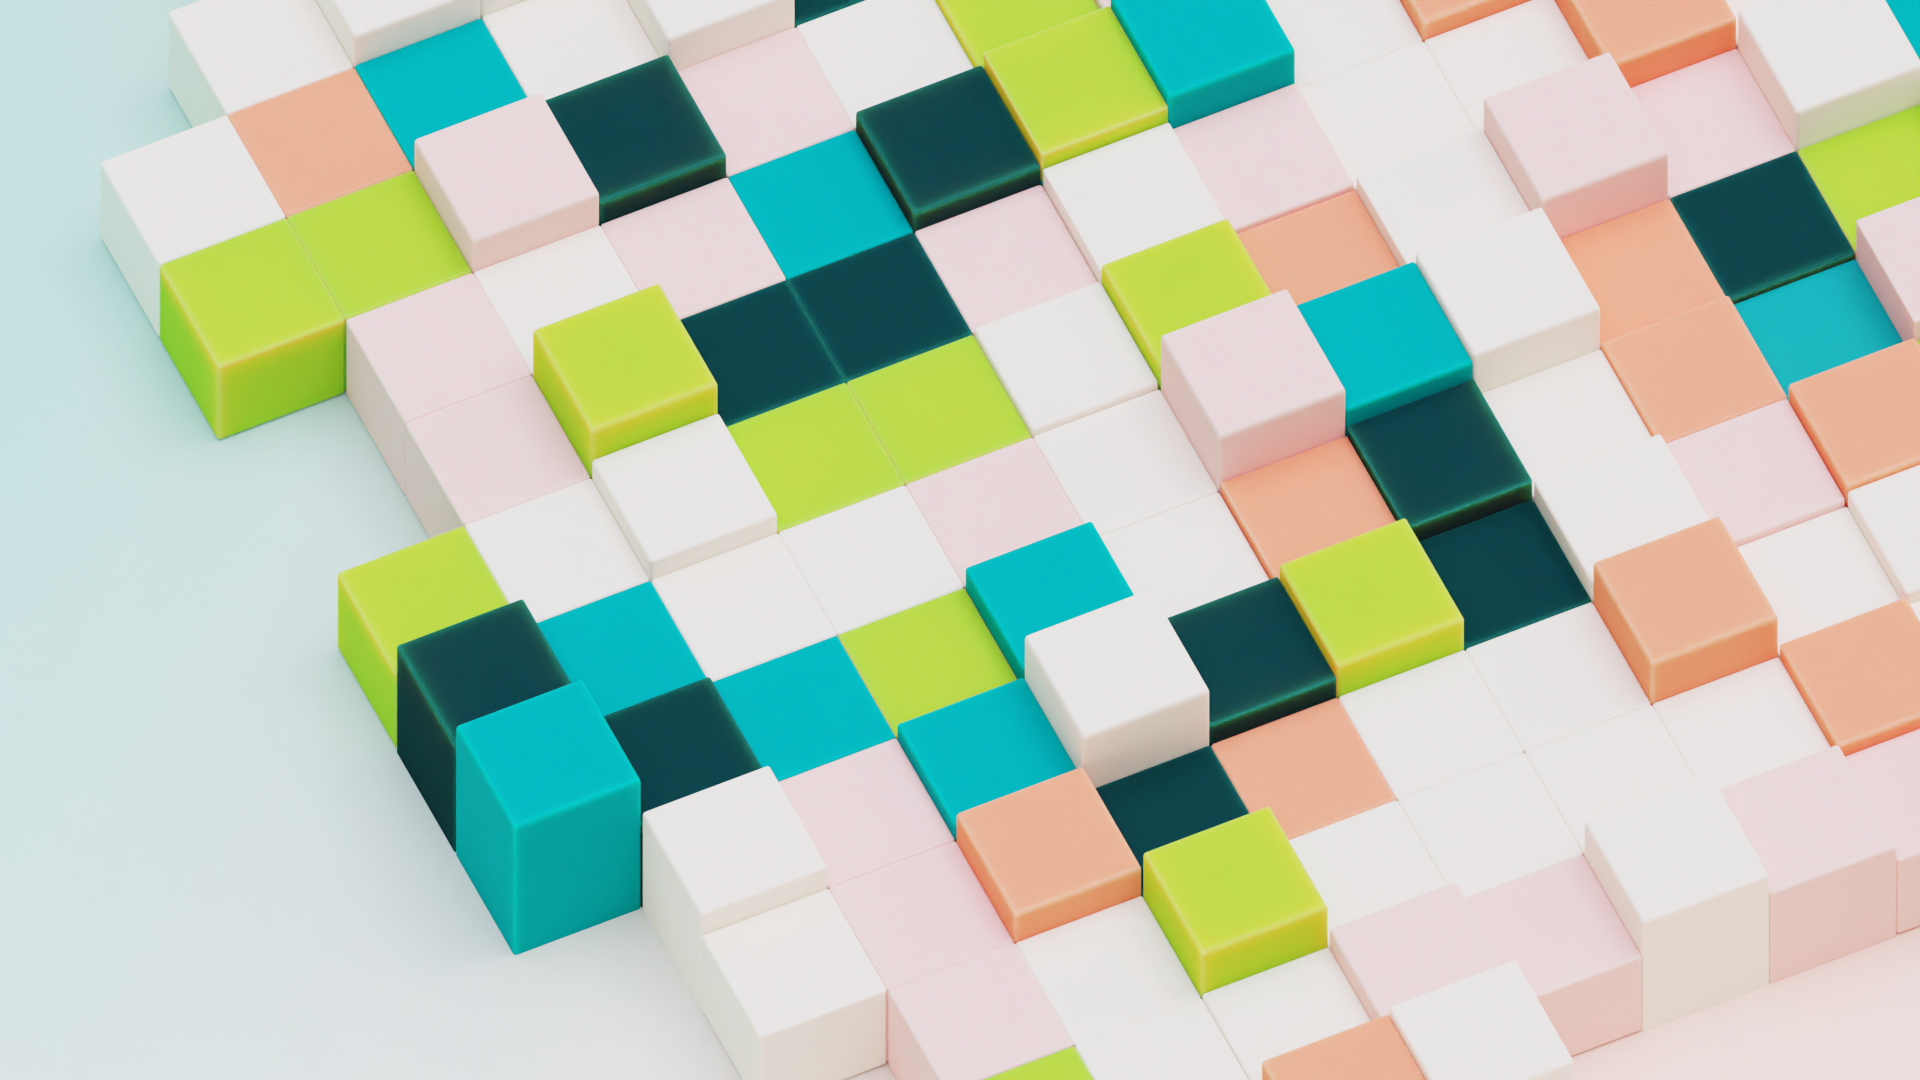 &why: 3d scene with cubes in green and rose tones